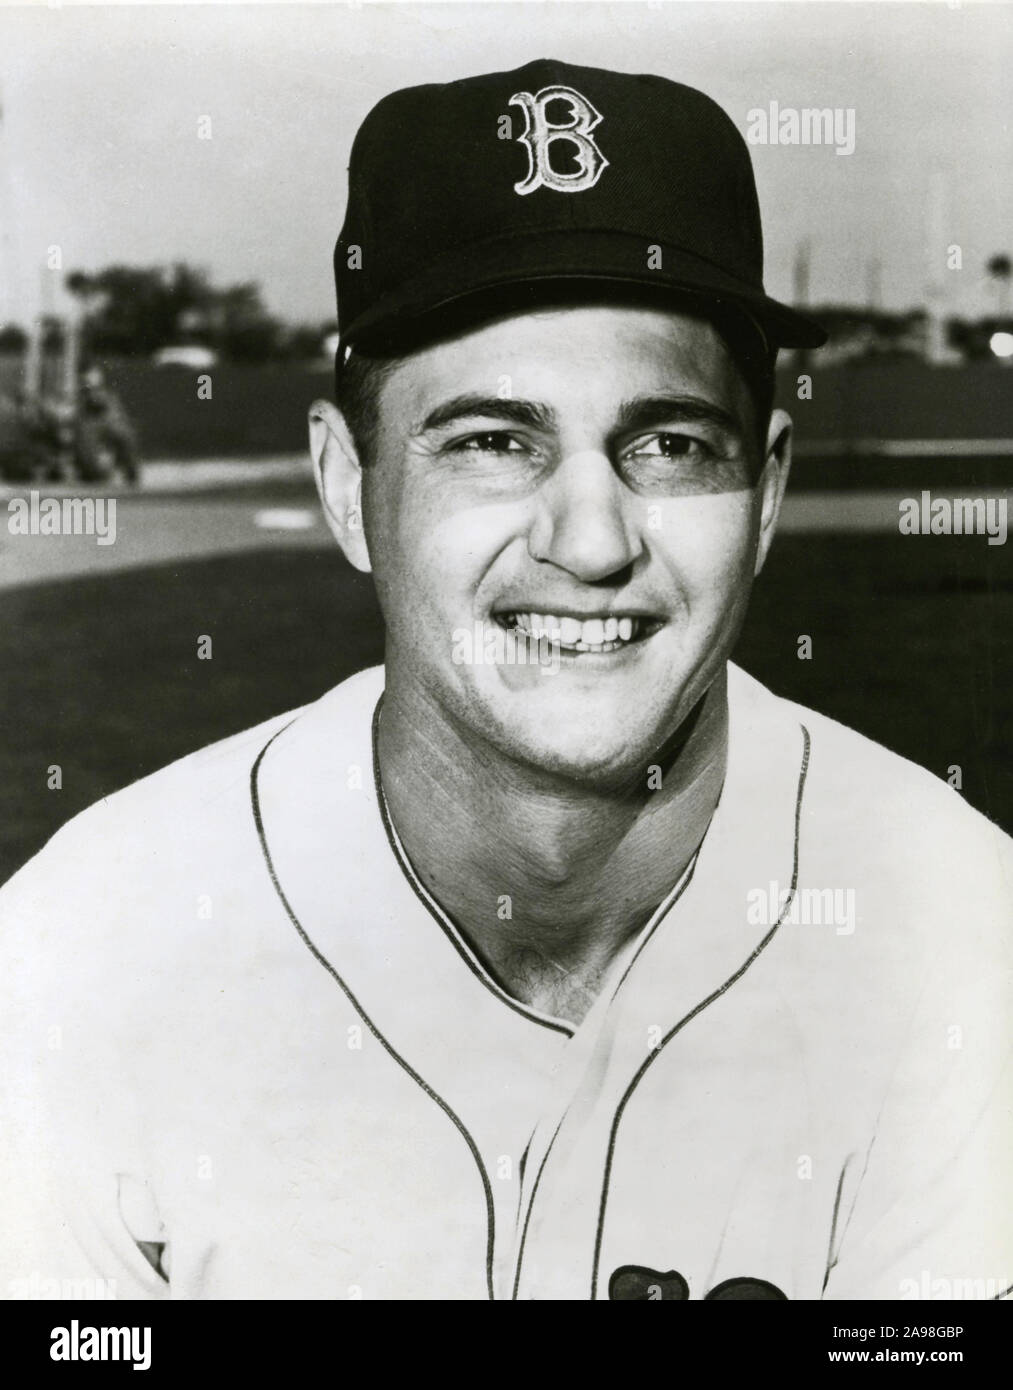 Vintage black and white photo of baseball player Carl Yastrzemski who was a star with the Boston Red Sox in the 1960s and 70s. Stock Photo